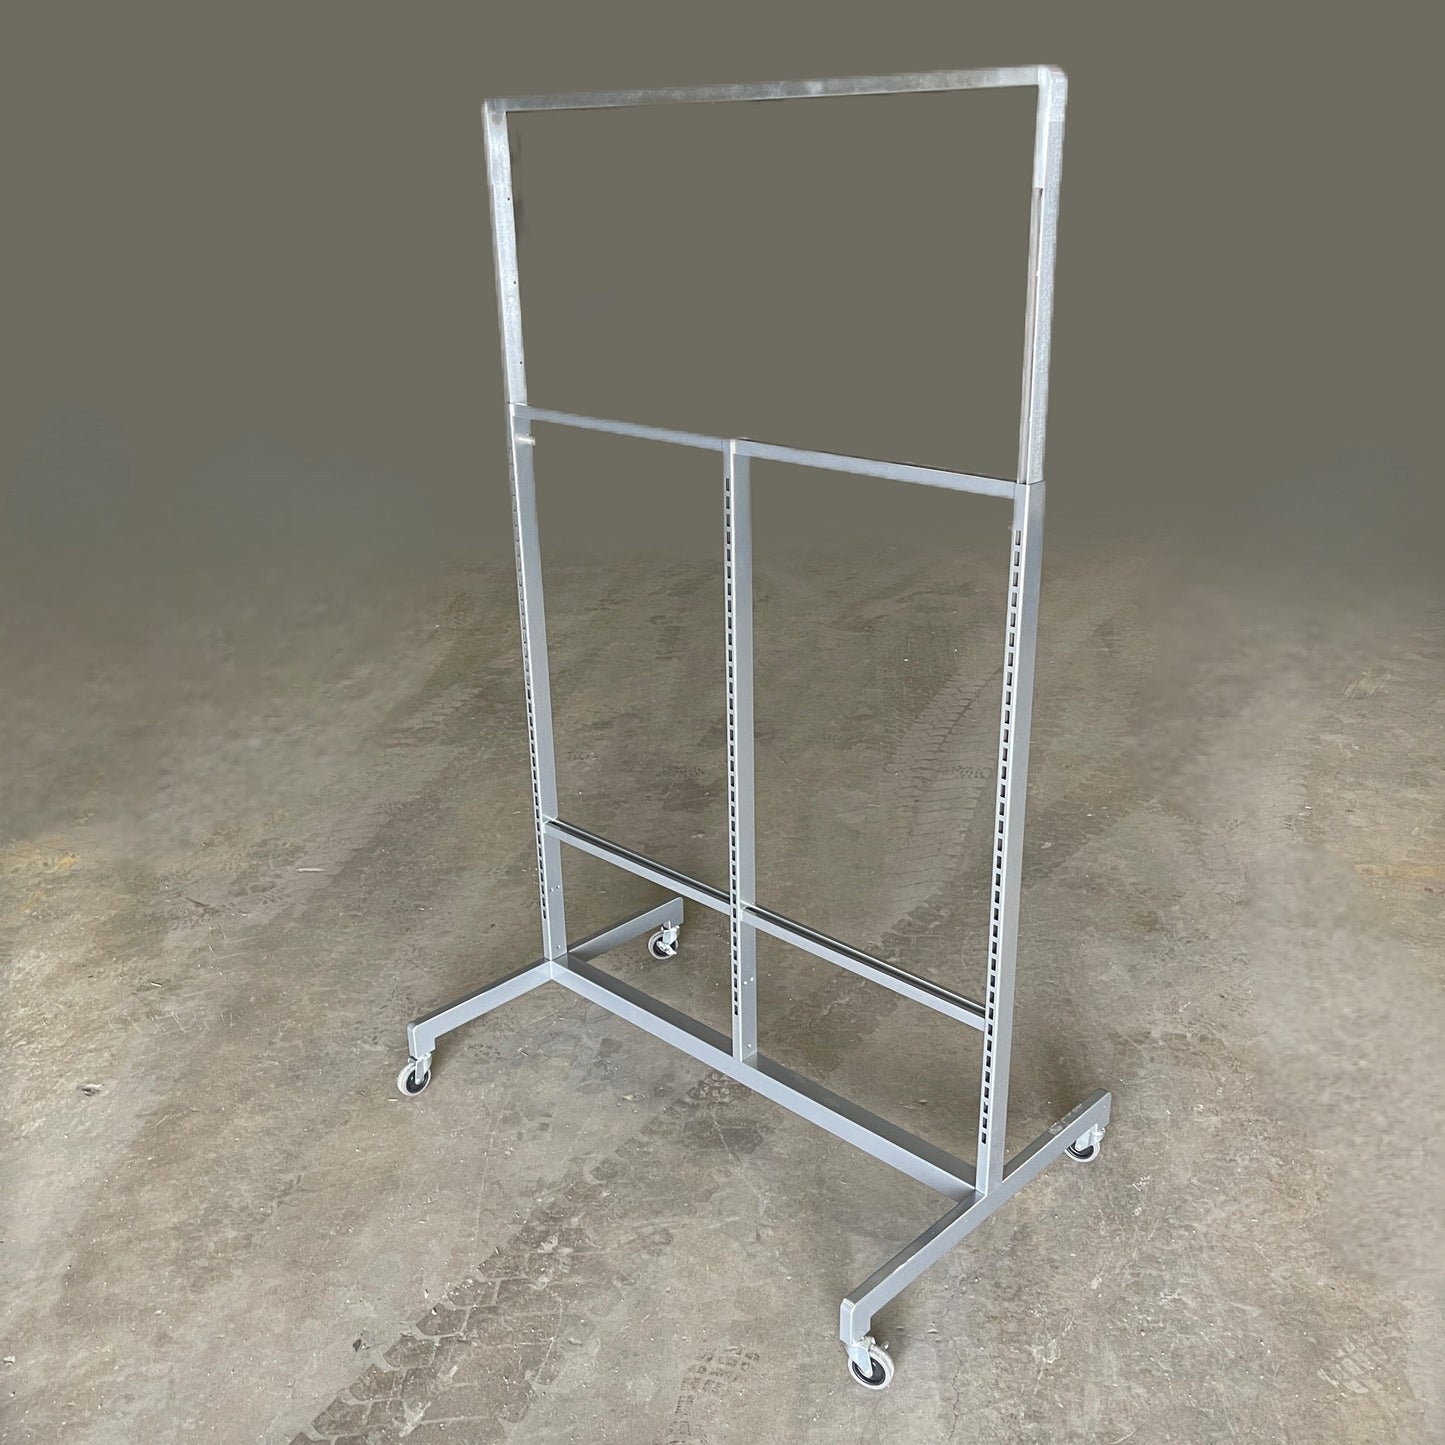 ARTITALIA GROUP Rolling Stainless Double Sided Store Display Stock Rack 48"W WF2565 (New)